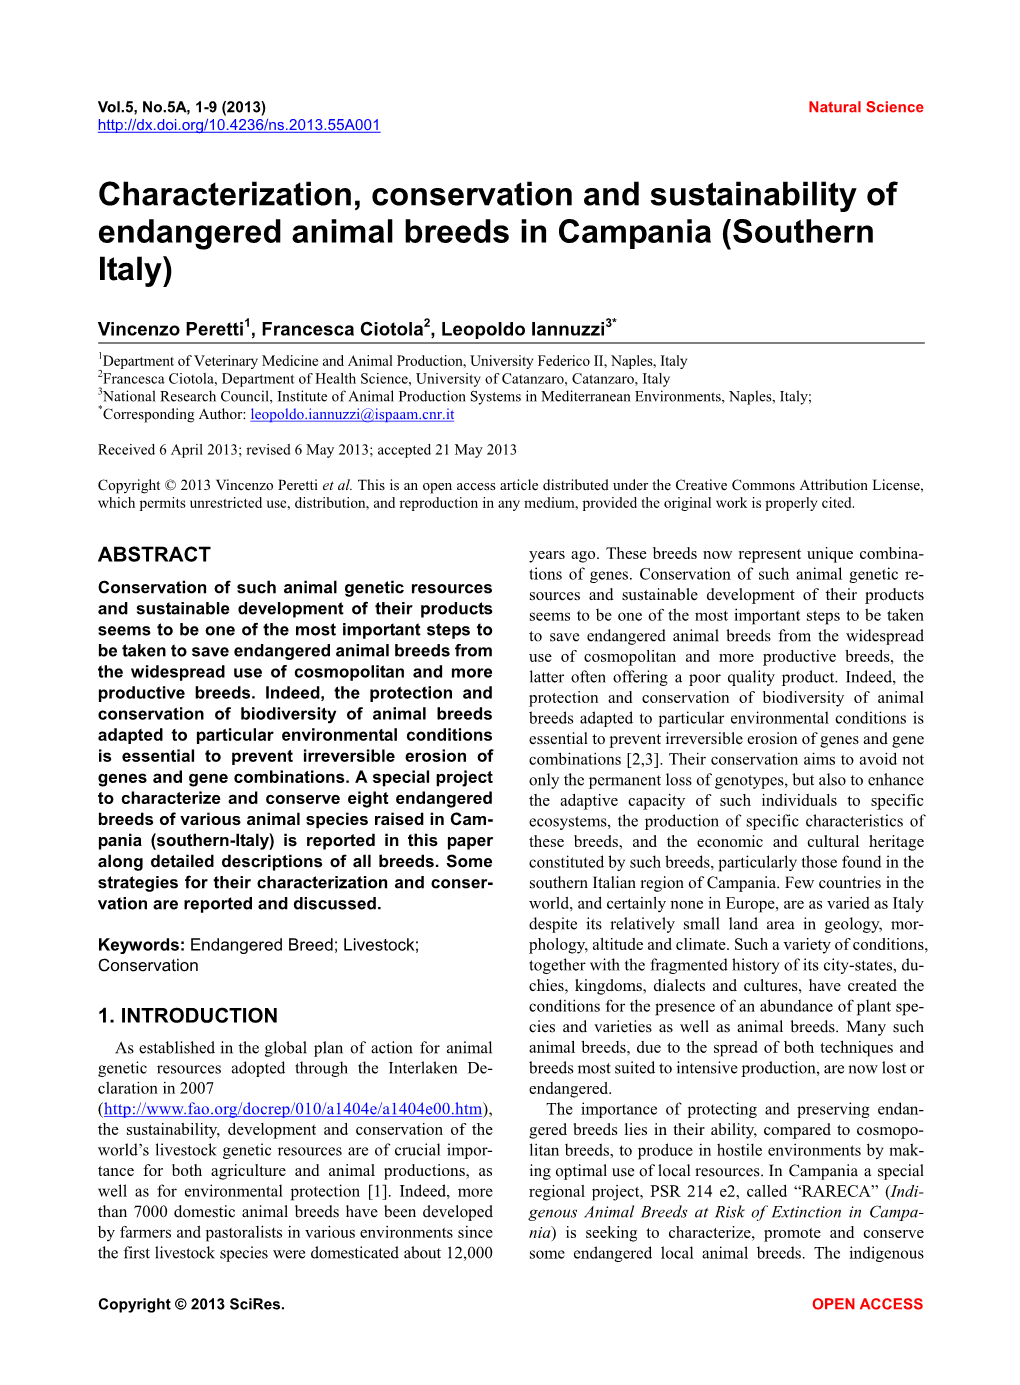 Characterization, Conservation and Sustainability of Endangered Animal Breeds in Campania (Southern Italy)